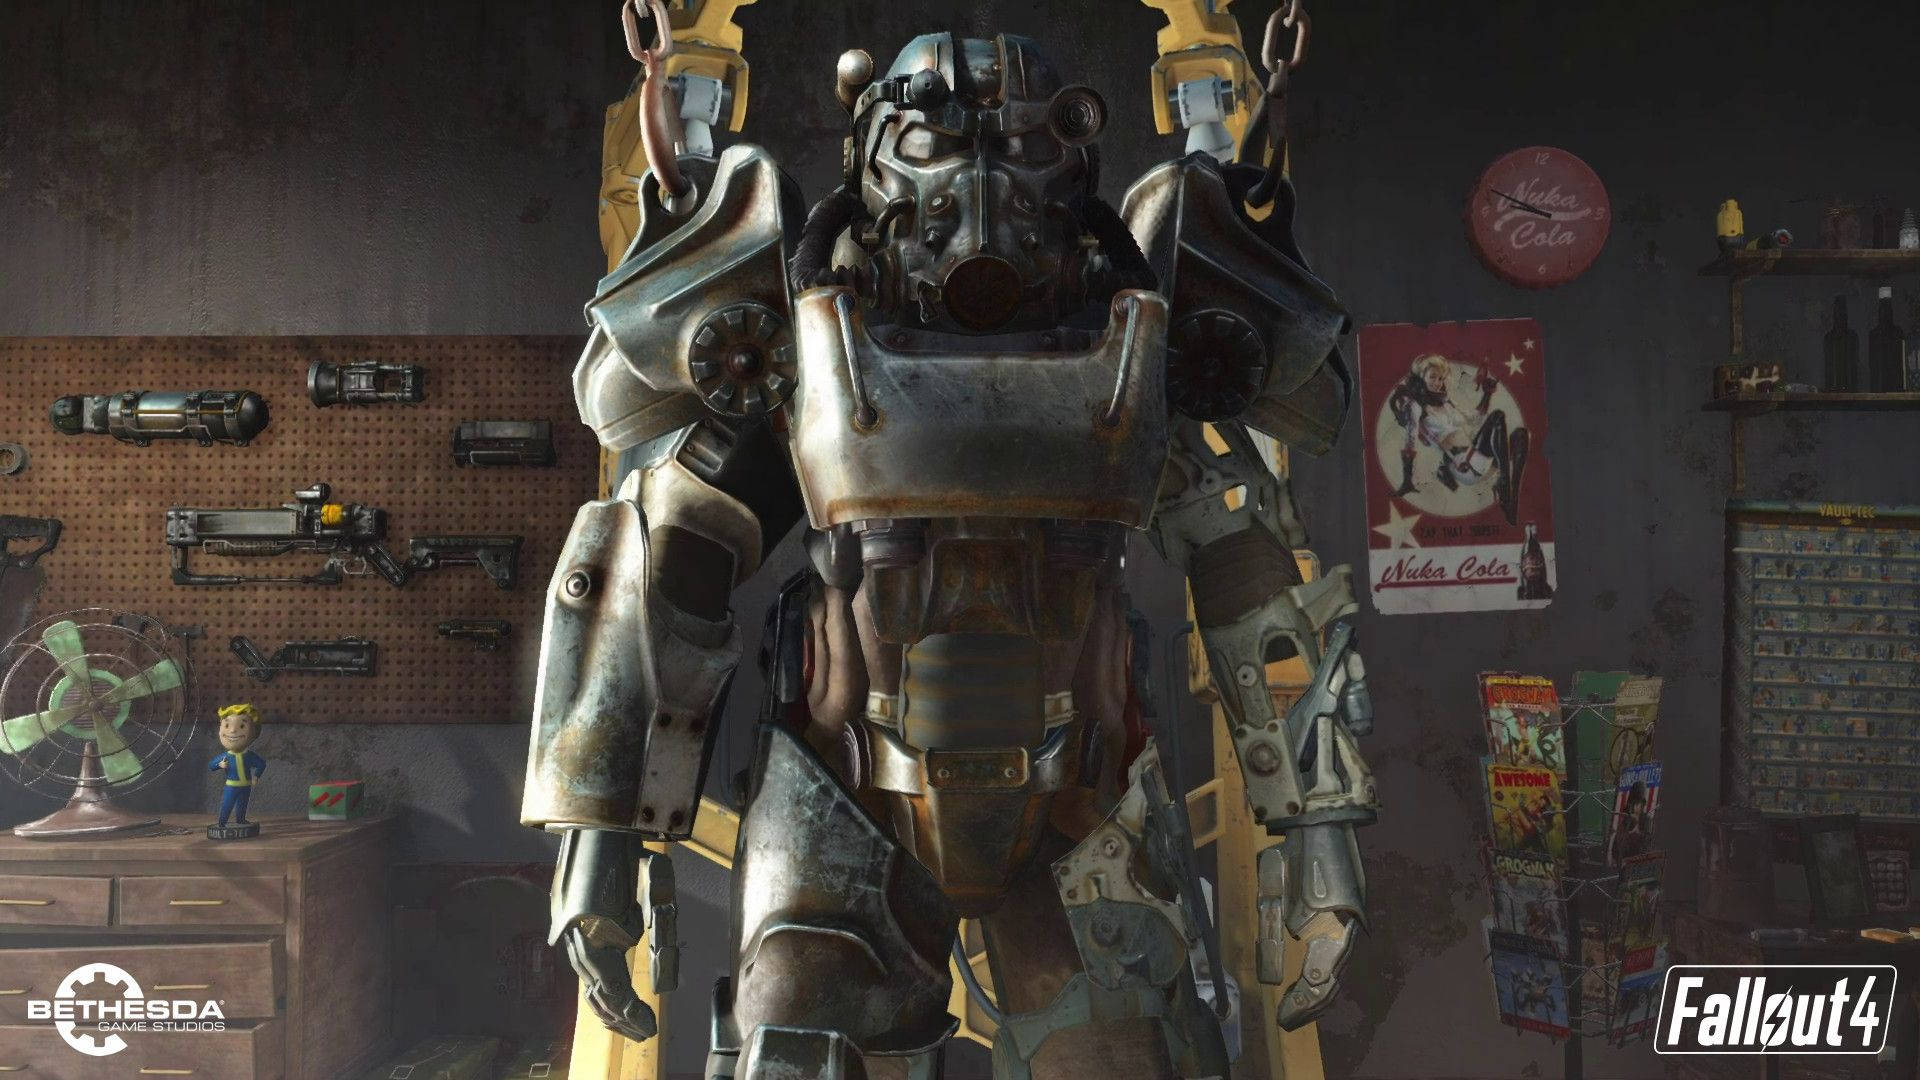 Fallout 4 Standing Chained Power Armor